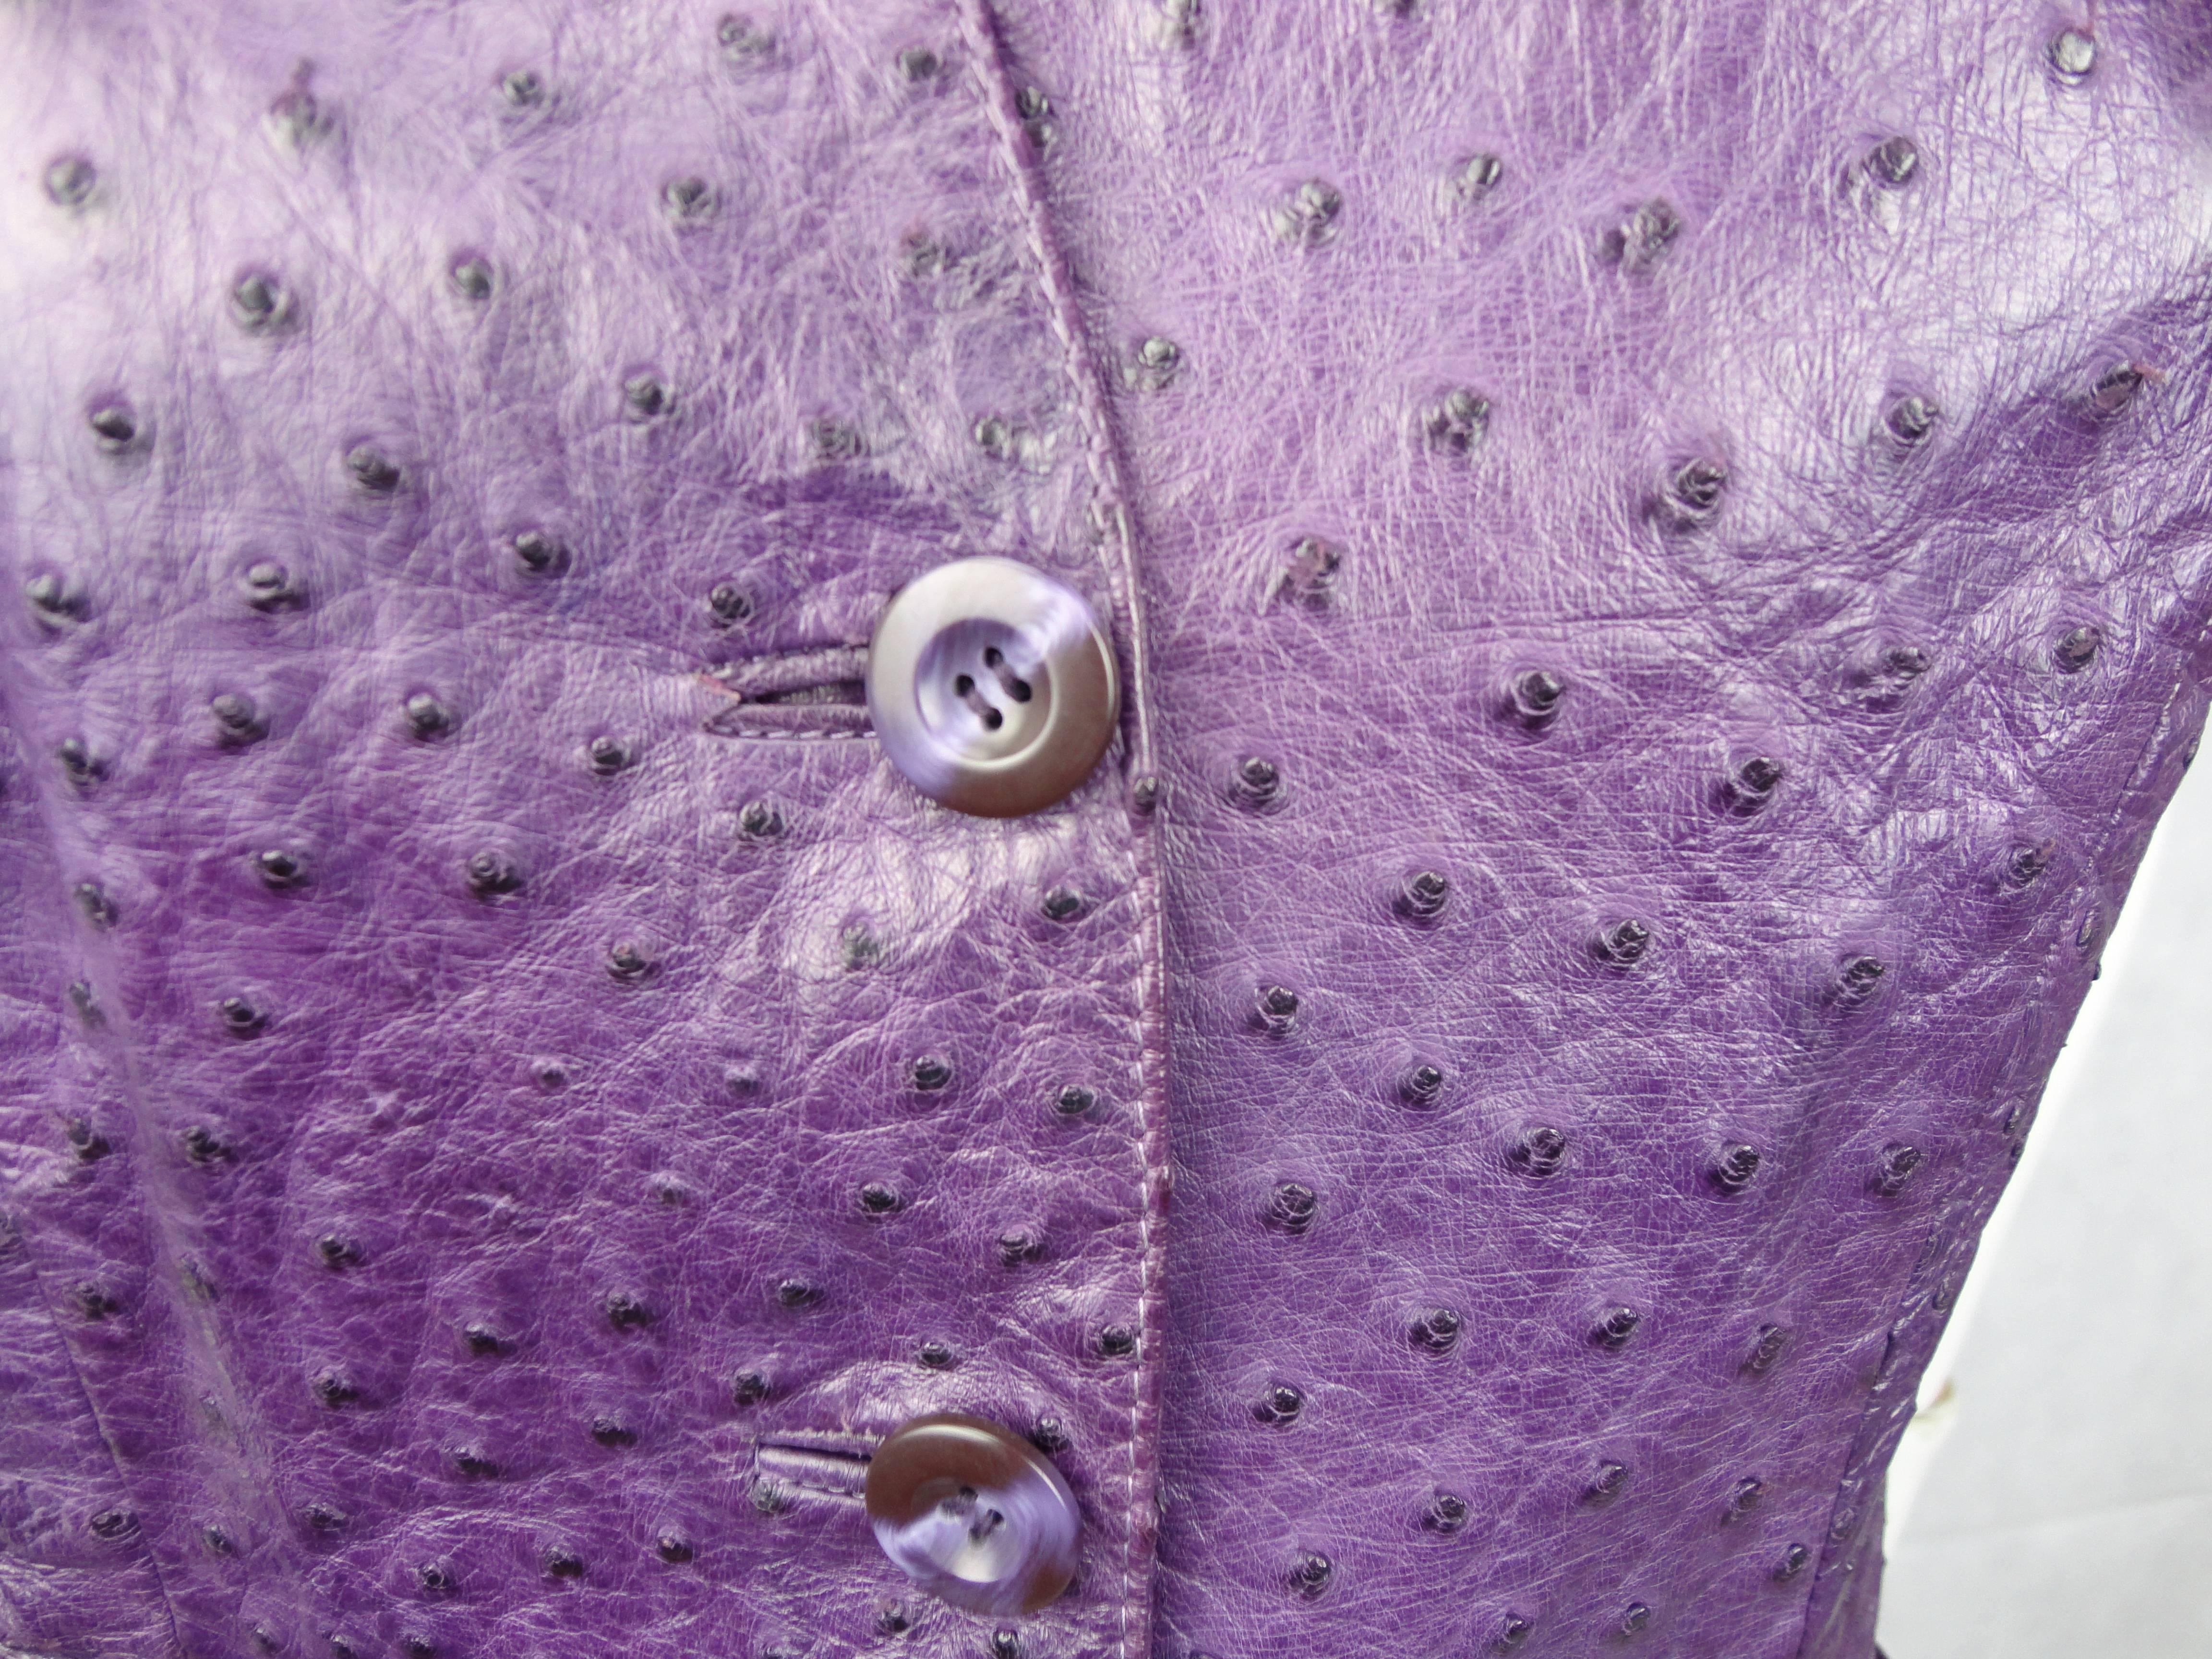 Loewe purple ostrich leather vest in mint condition, both inside and out. Silk lining with loewe watermark.
Unique piece!

Size 42
Shoulder 39 cm
Lenght 54 cm
Chest 46 cm